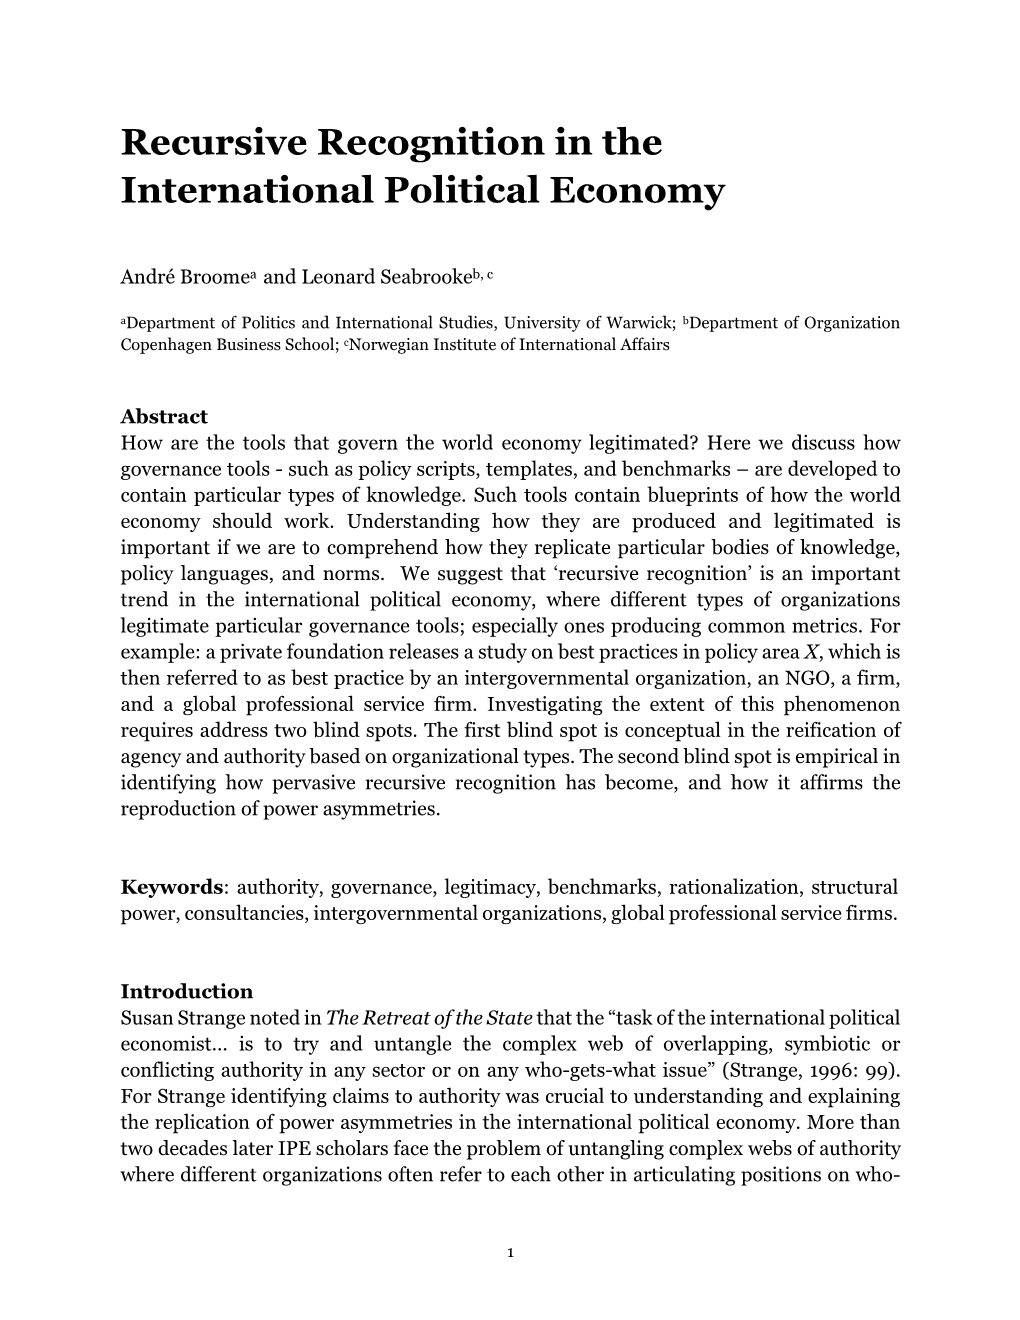 Recursive Recognition in the International Political Economy